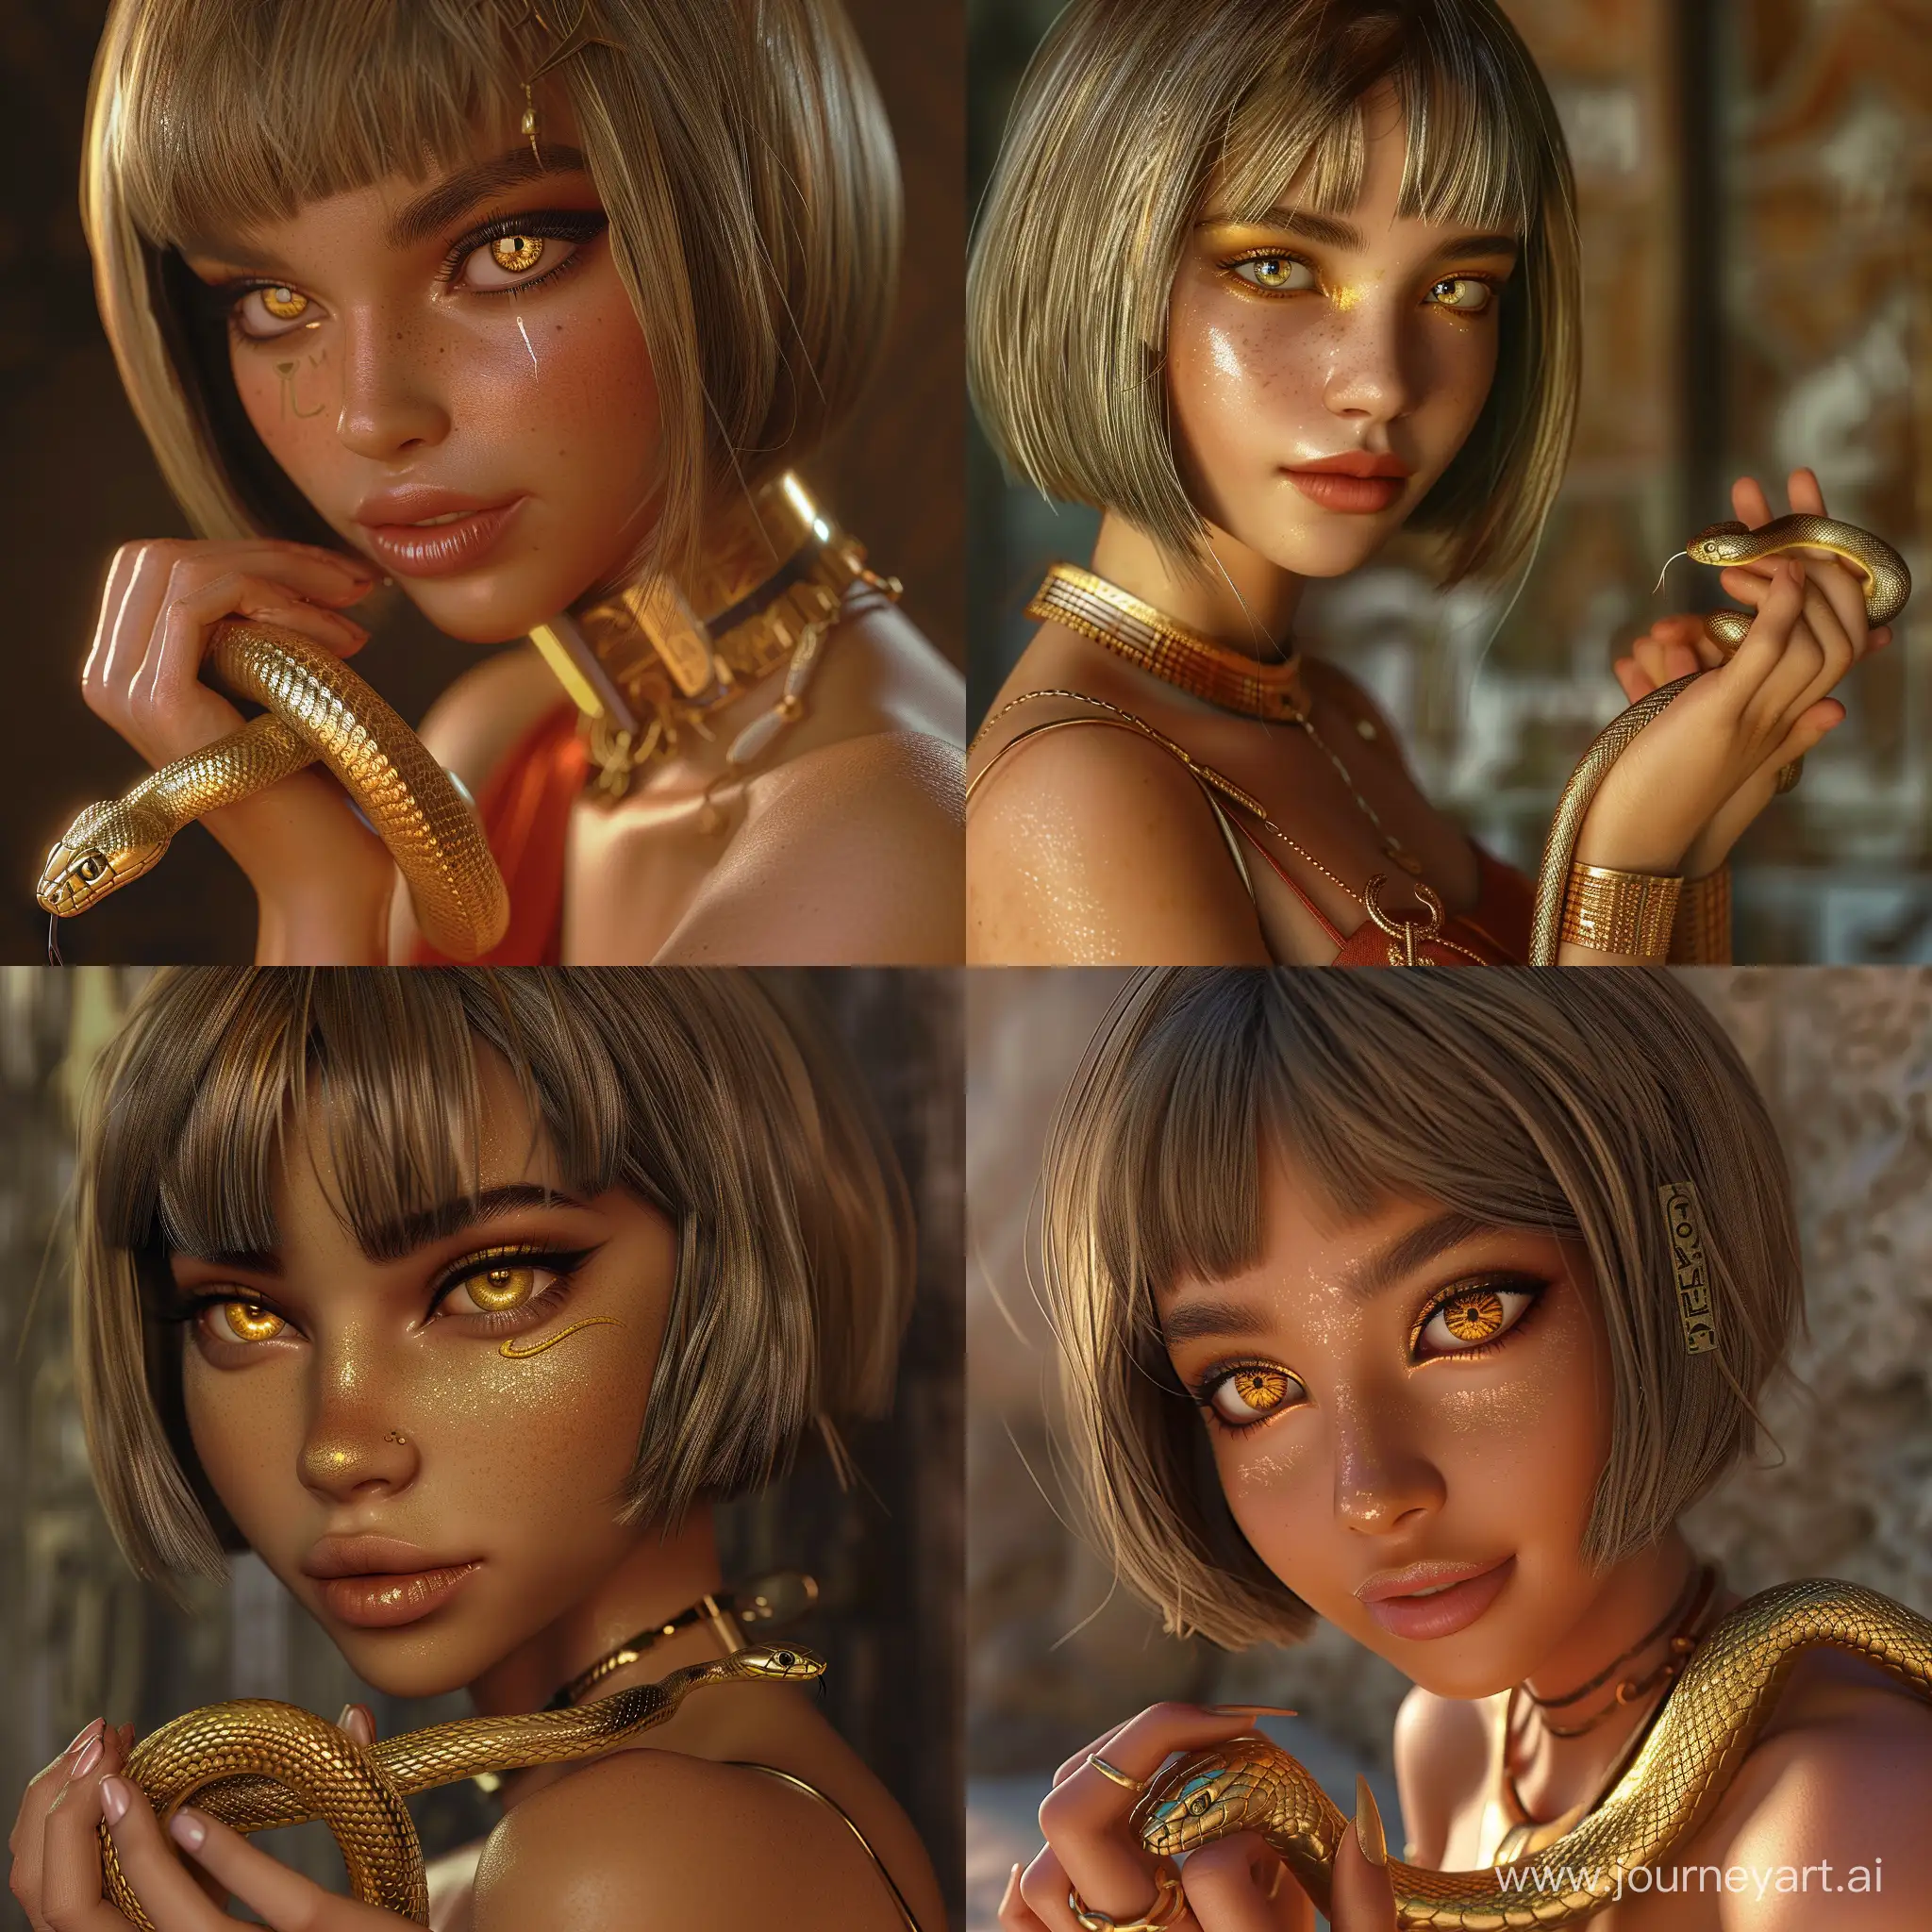 Egyptian-GoldenEyed-Girl-with-Bob-Hairstyle-Holding-a-Serpentine-Treasure